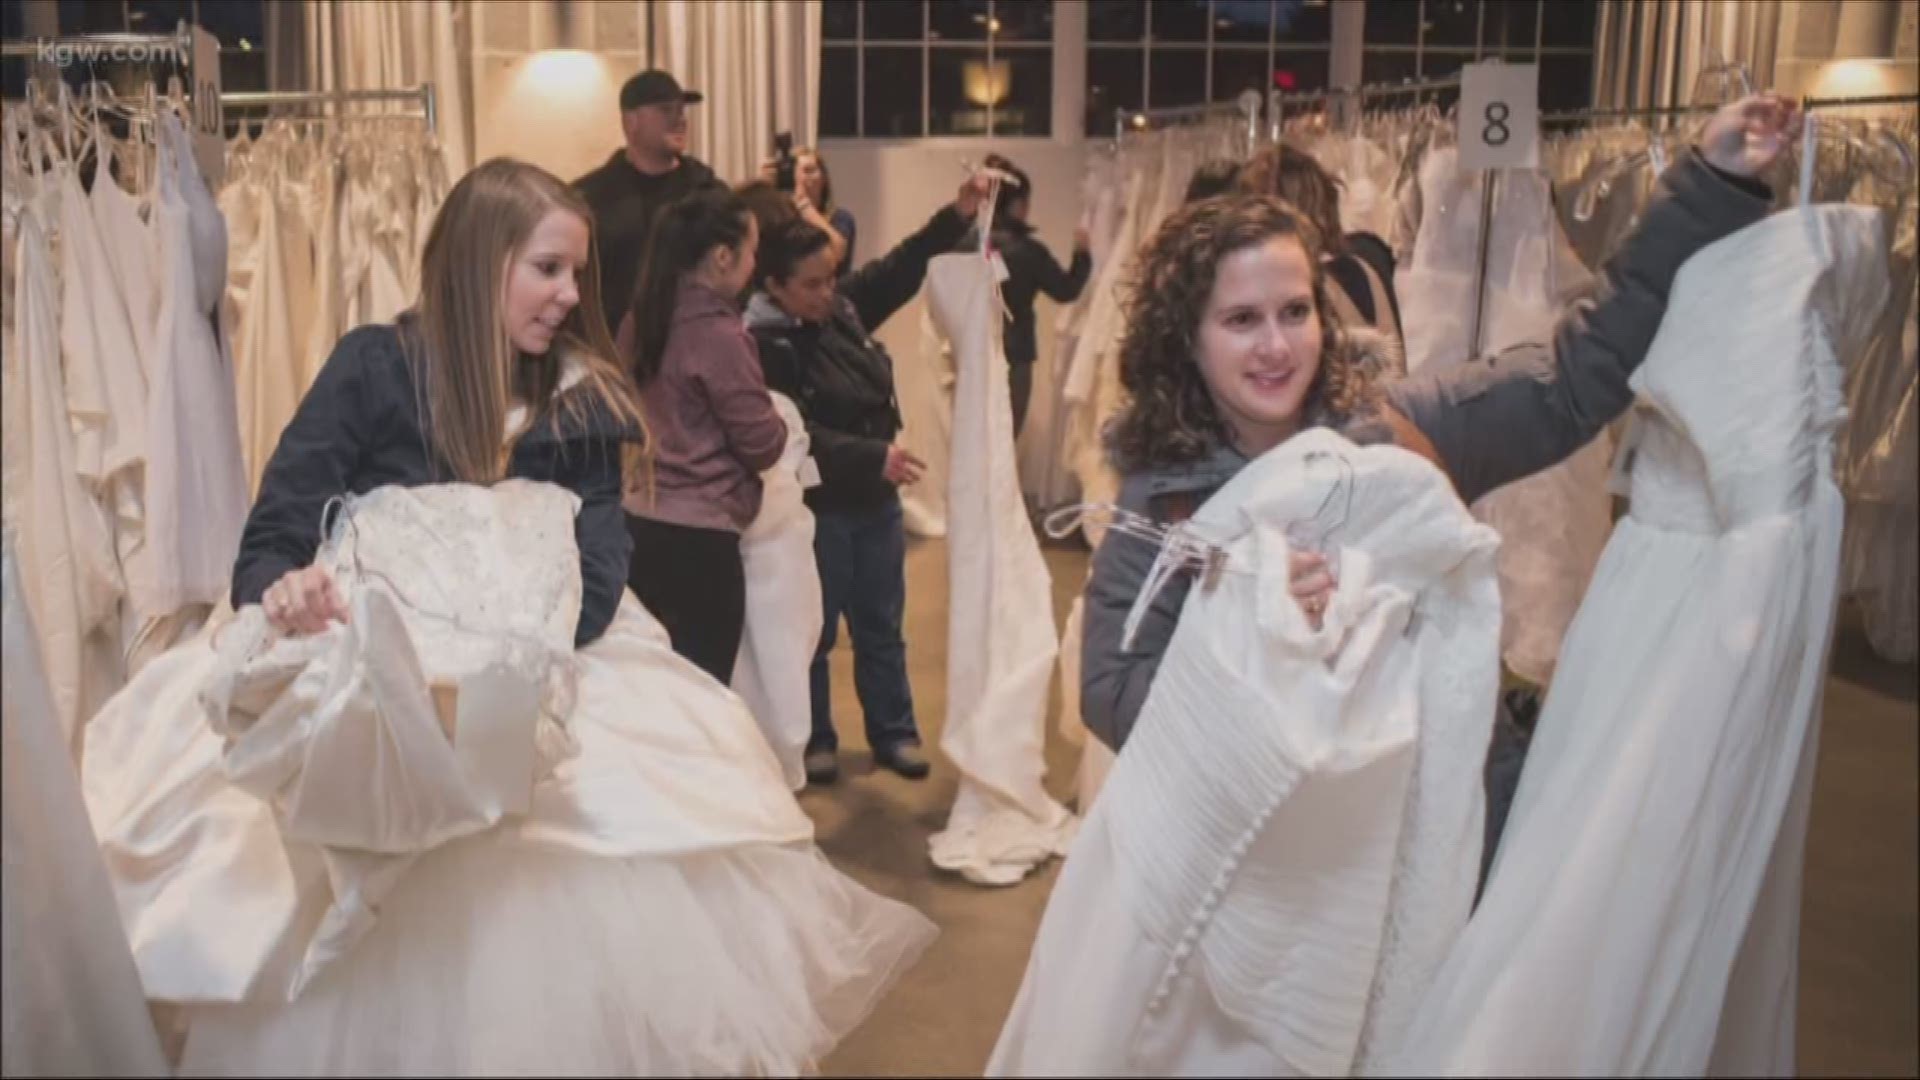 The "Dress Dash" with Brides for a Cause is this Saturday. It's your chance to score a wedding gown for $150.
bridesforacause.com
#TonightwithCassidy